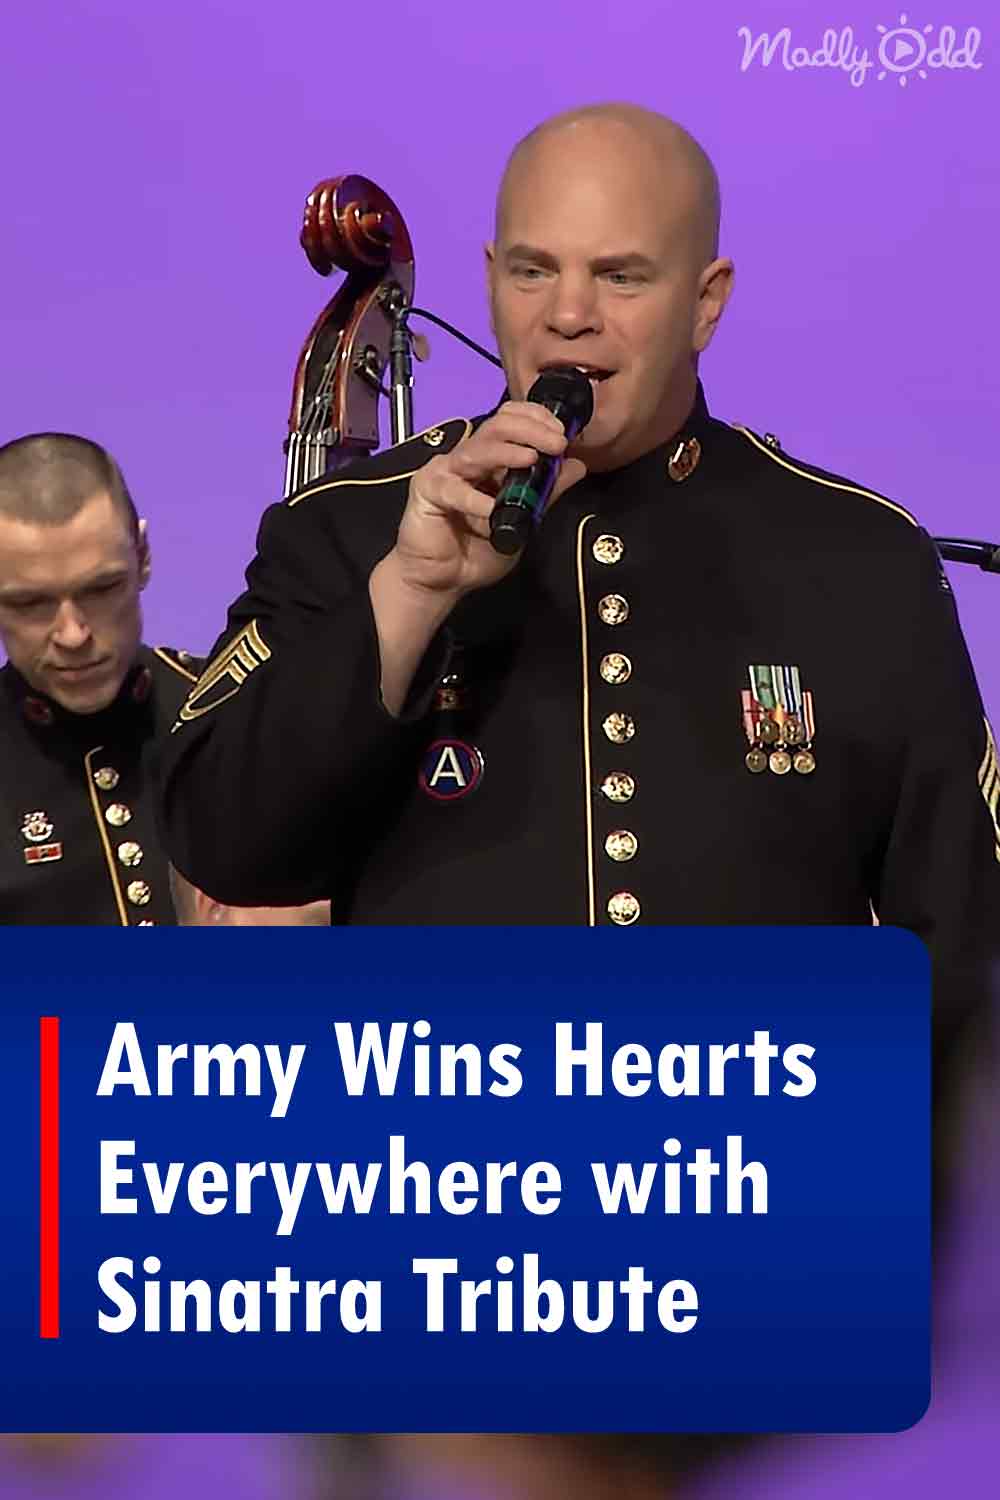 Army Wins Hearts Everywhere with Sinatra Tribute